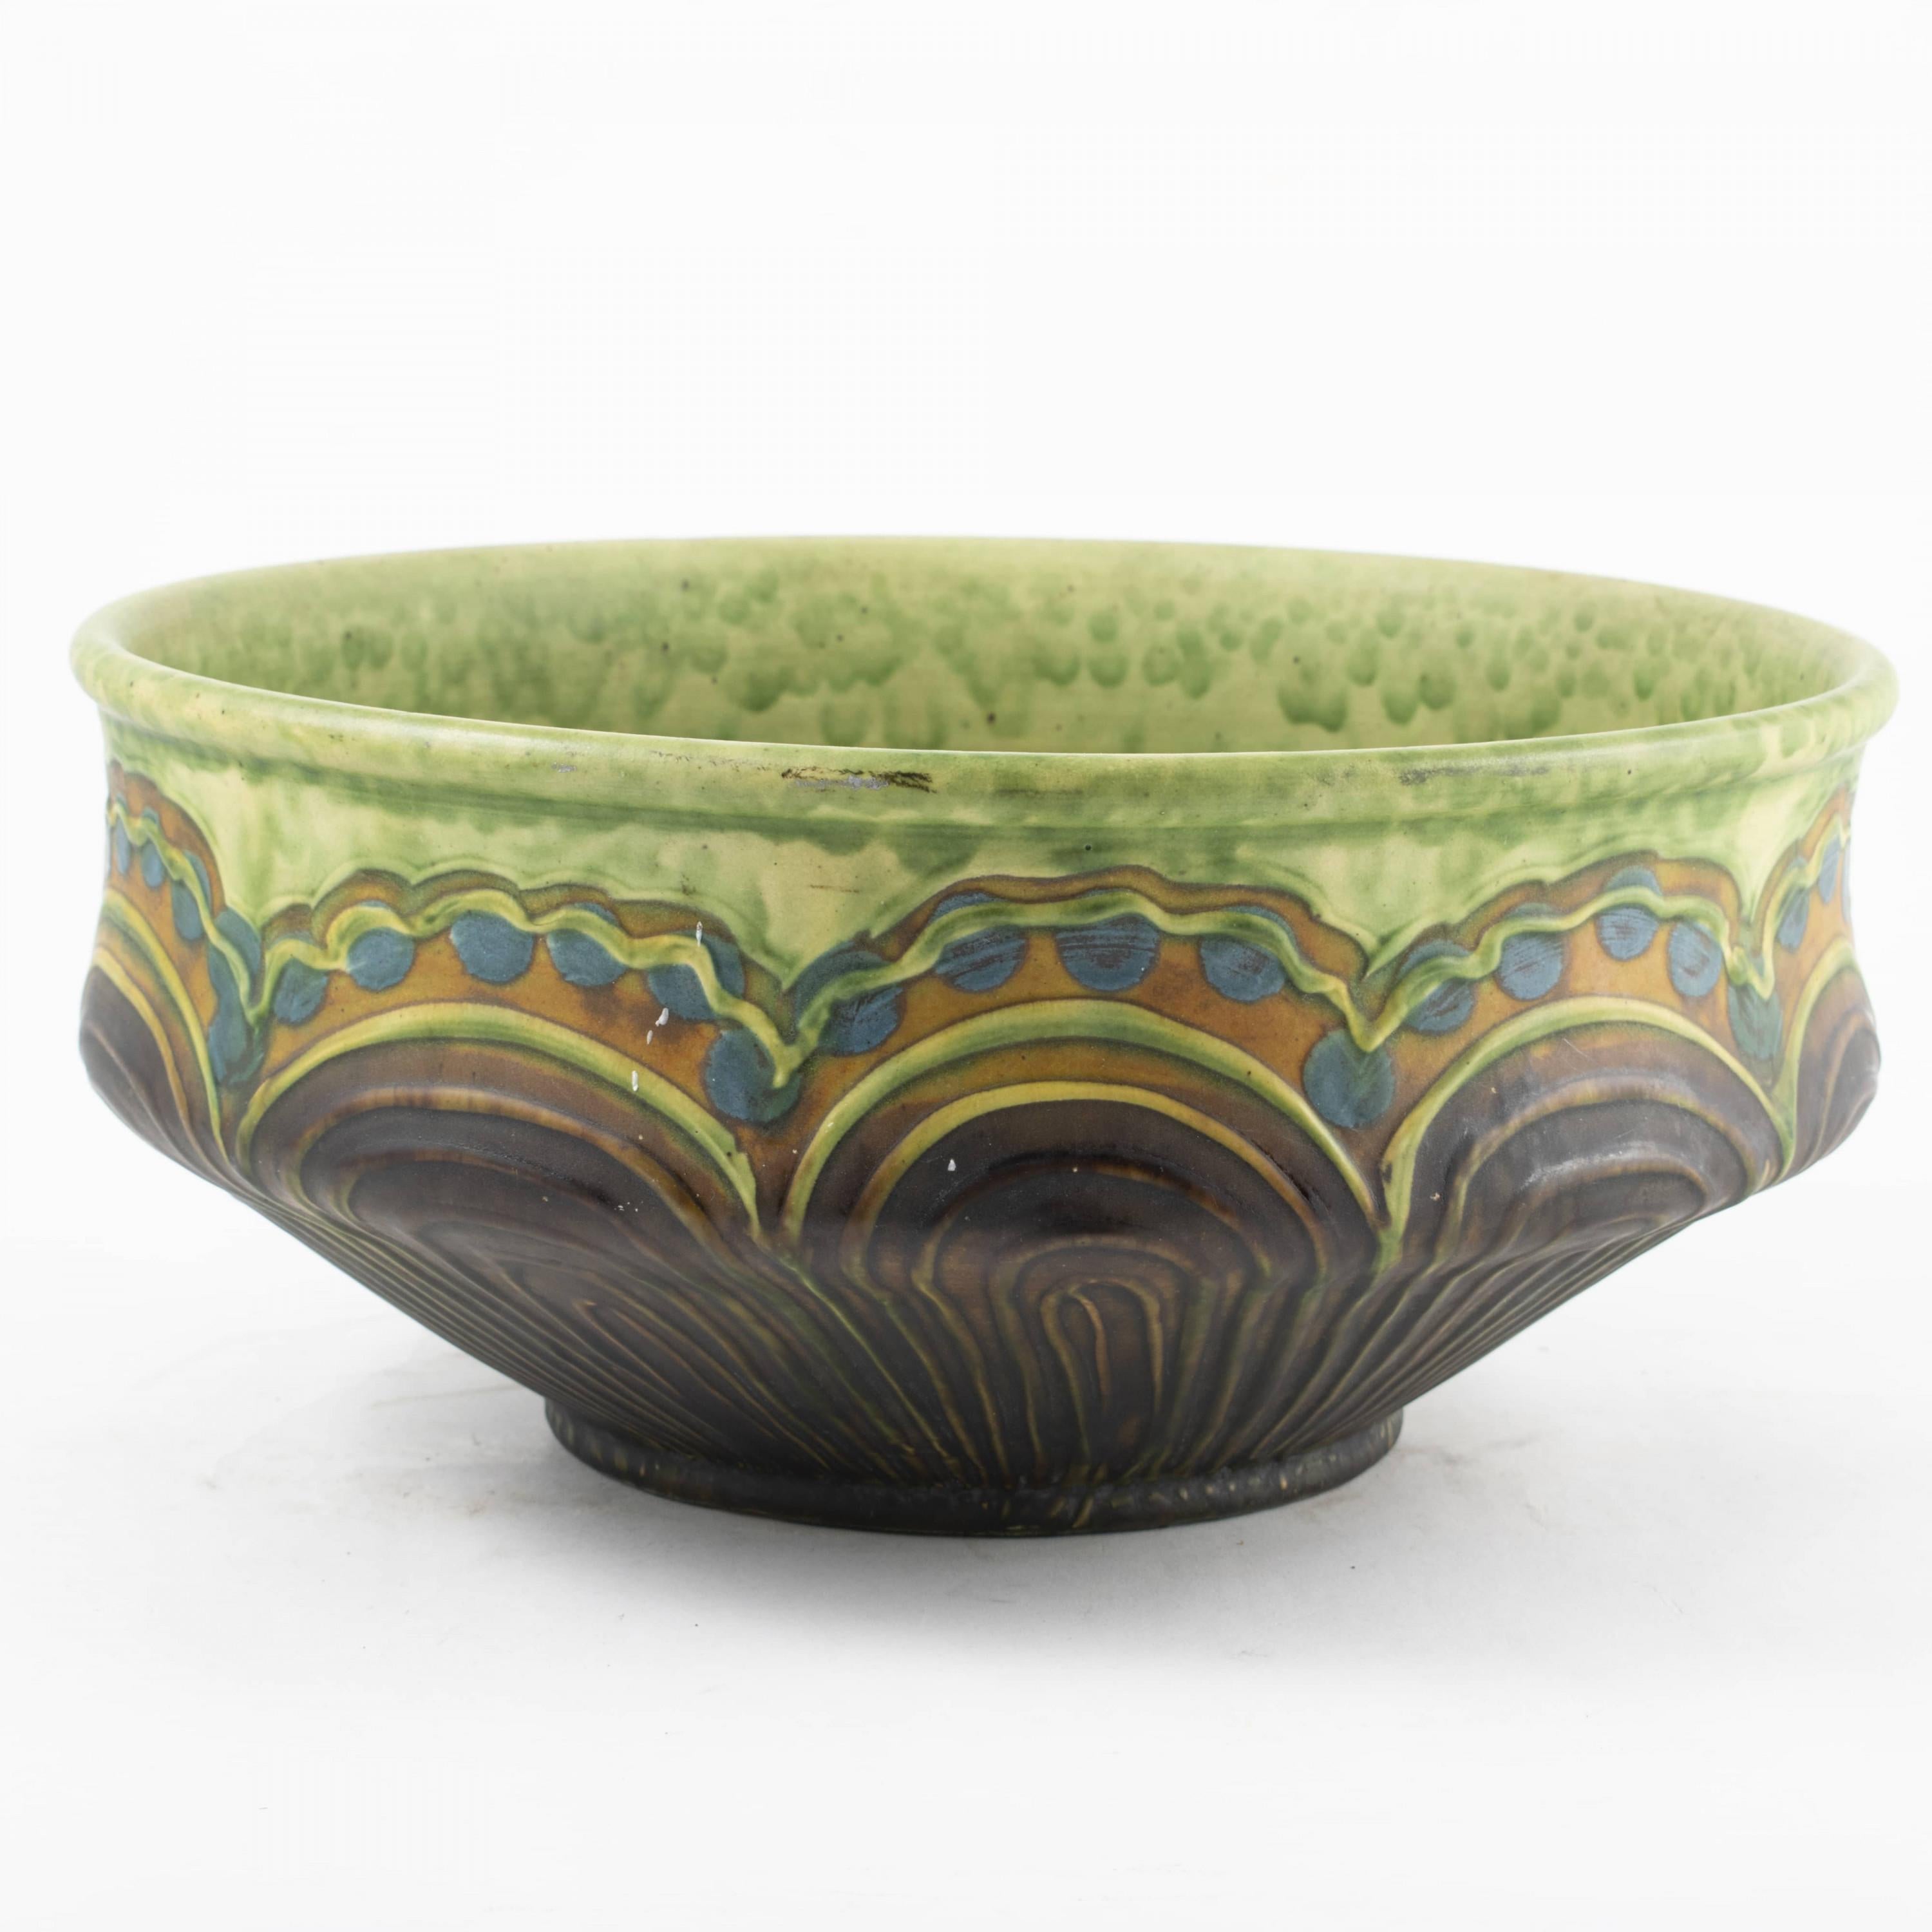 Kähler Art Nouveau ceramic bowl.
Decorated with polychrome glaze in a typical art nouveau pattern.
Signed HAK for Herman A. Kähler. Approx. 1900-1910.